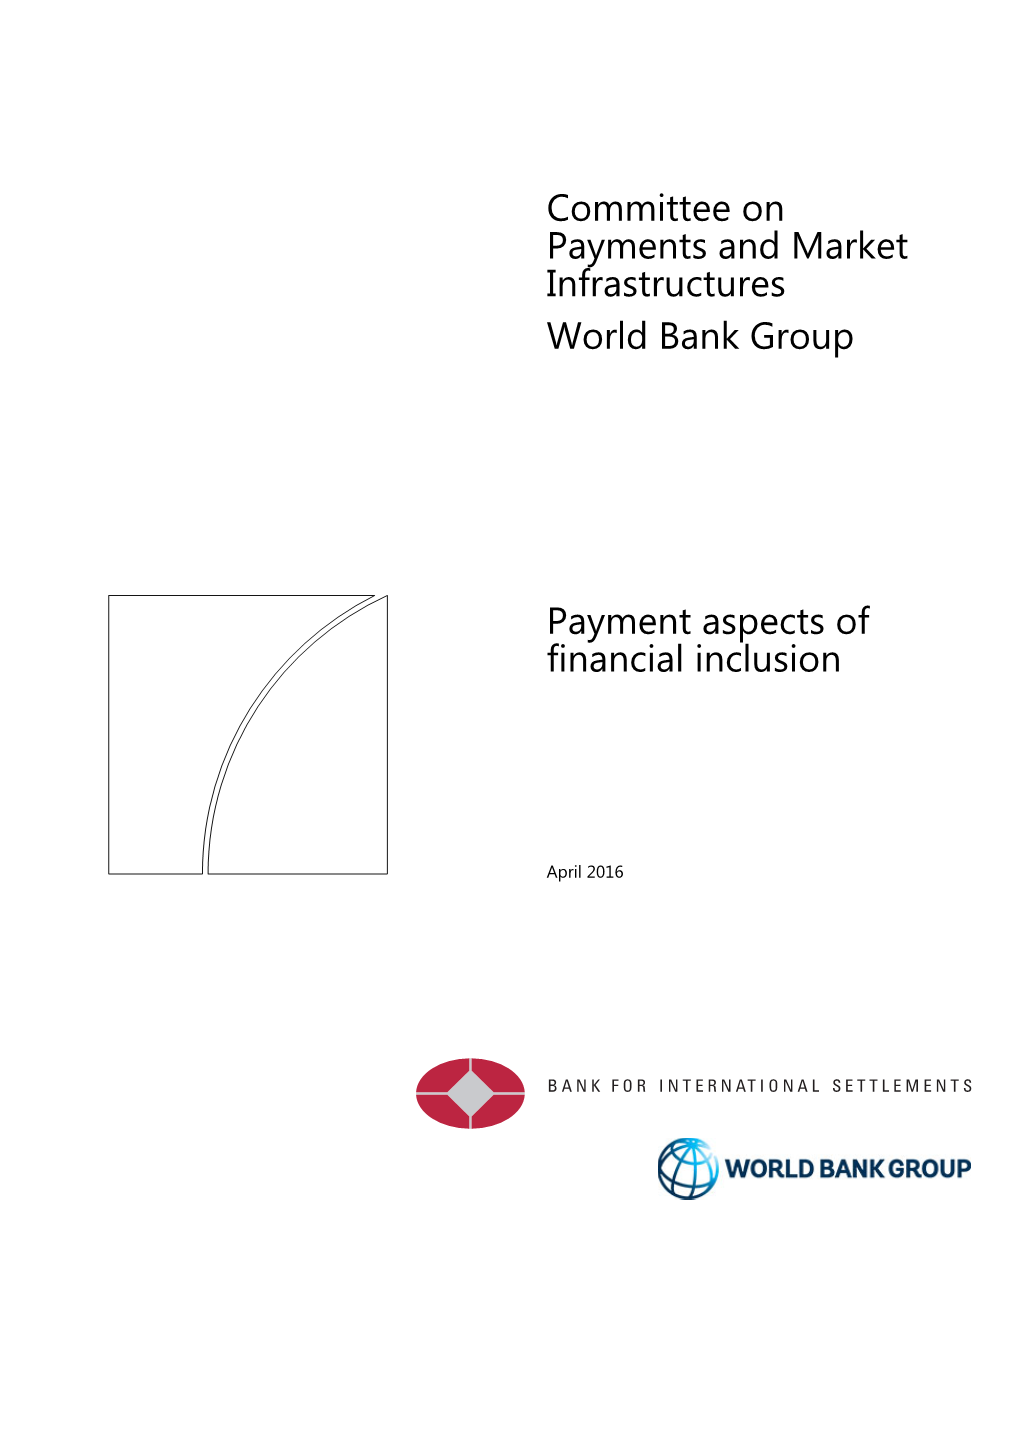 Payment Aspects of Financial Inclusion